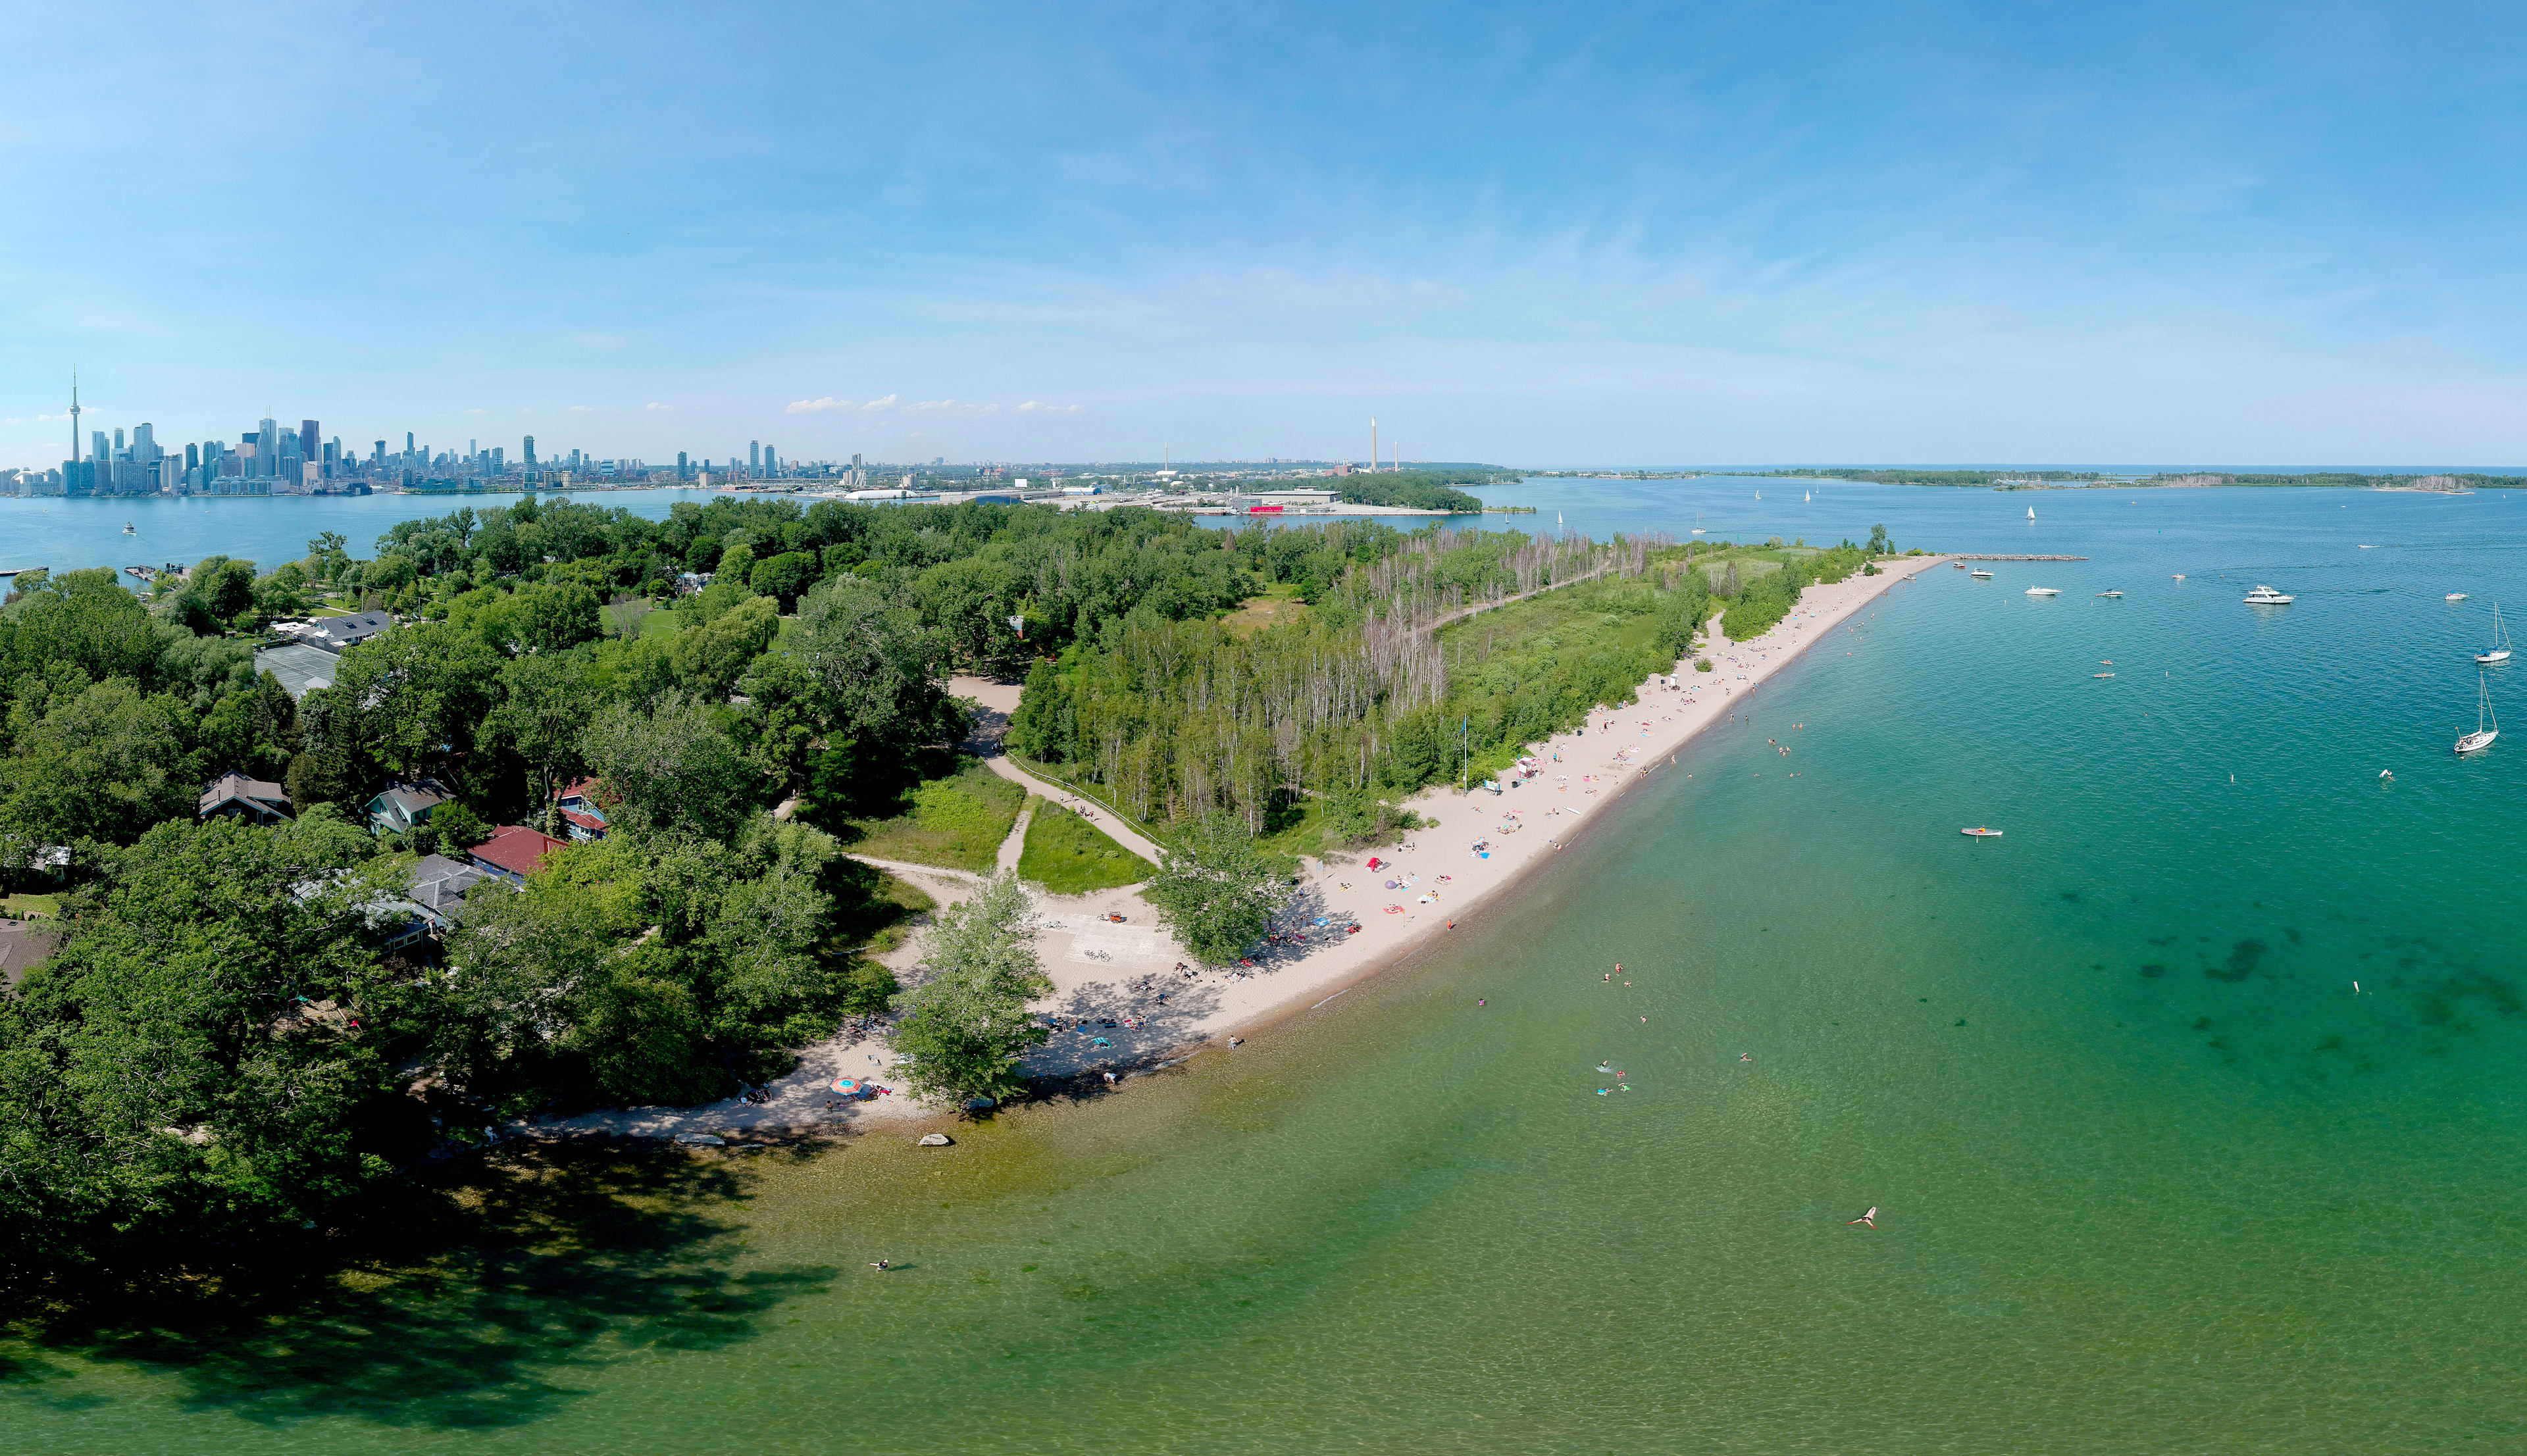 Aerial shot of the Toronto Island - including the beach on a clear sunny day.